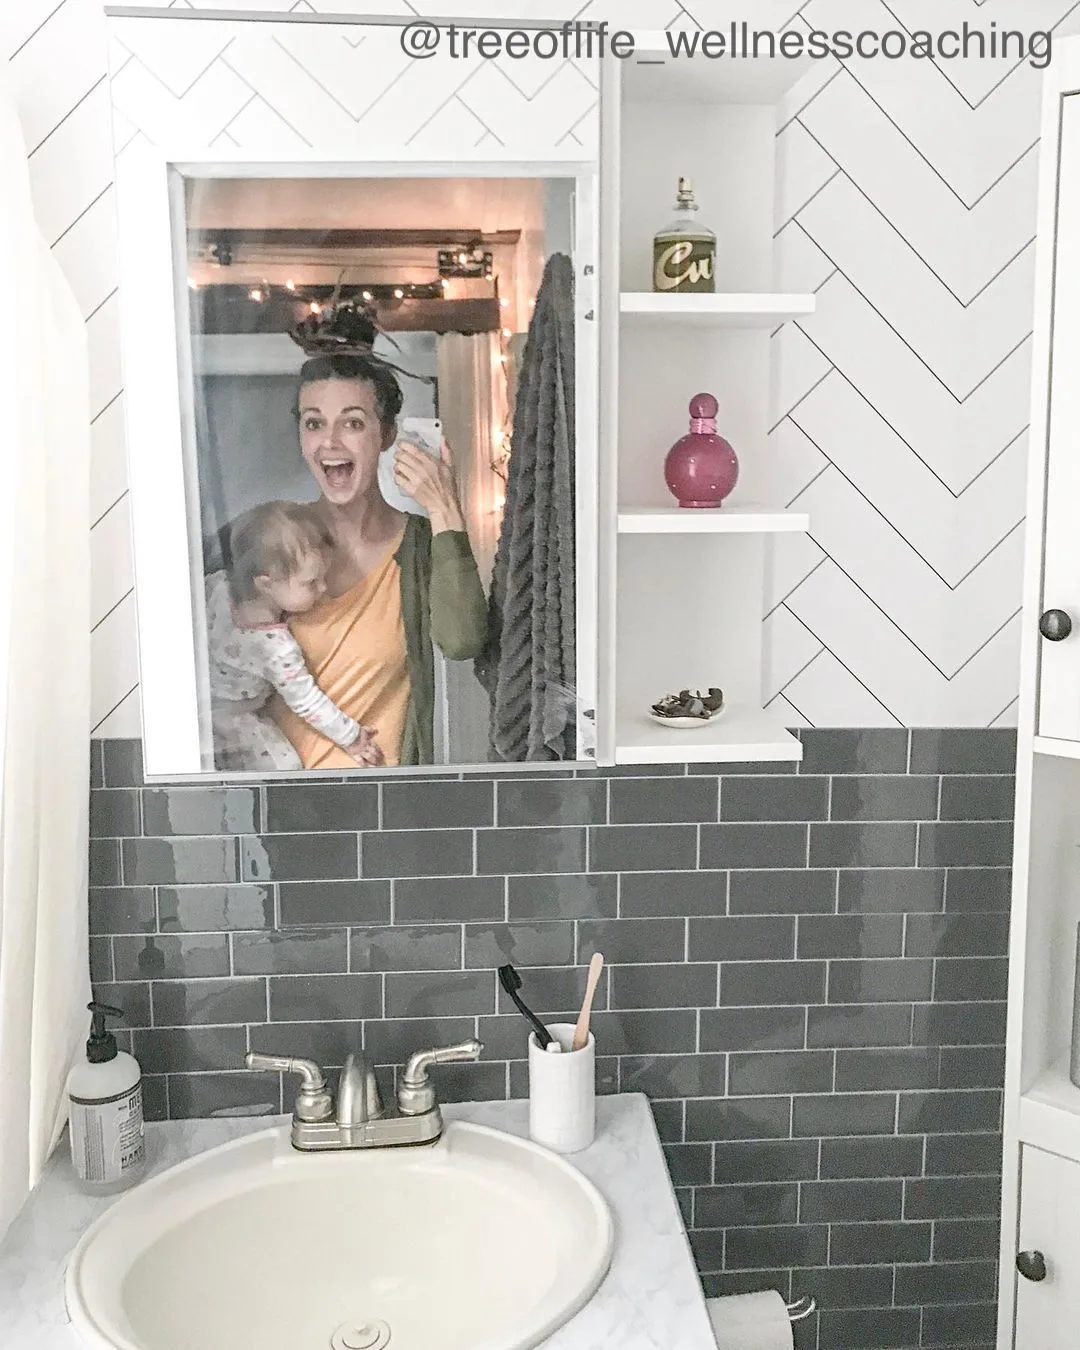 Smiling woman seen holding a baby in the reflection of a small bathrooms mirror.